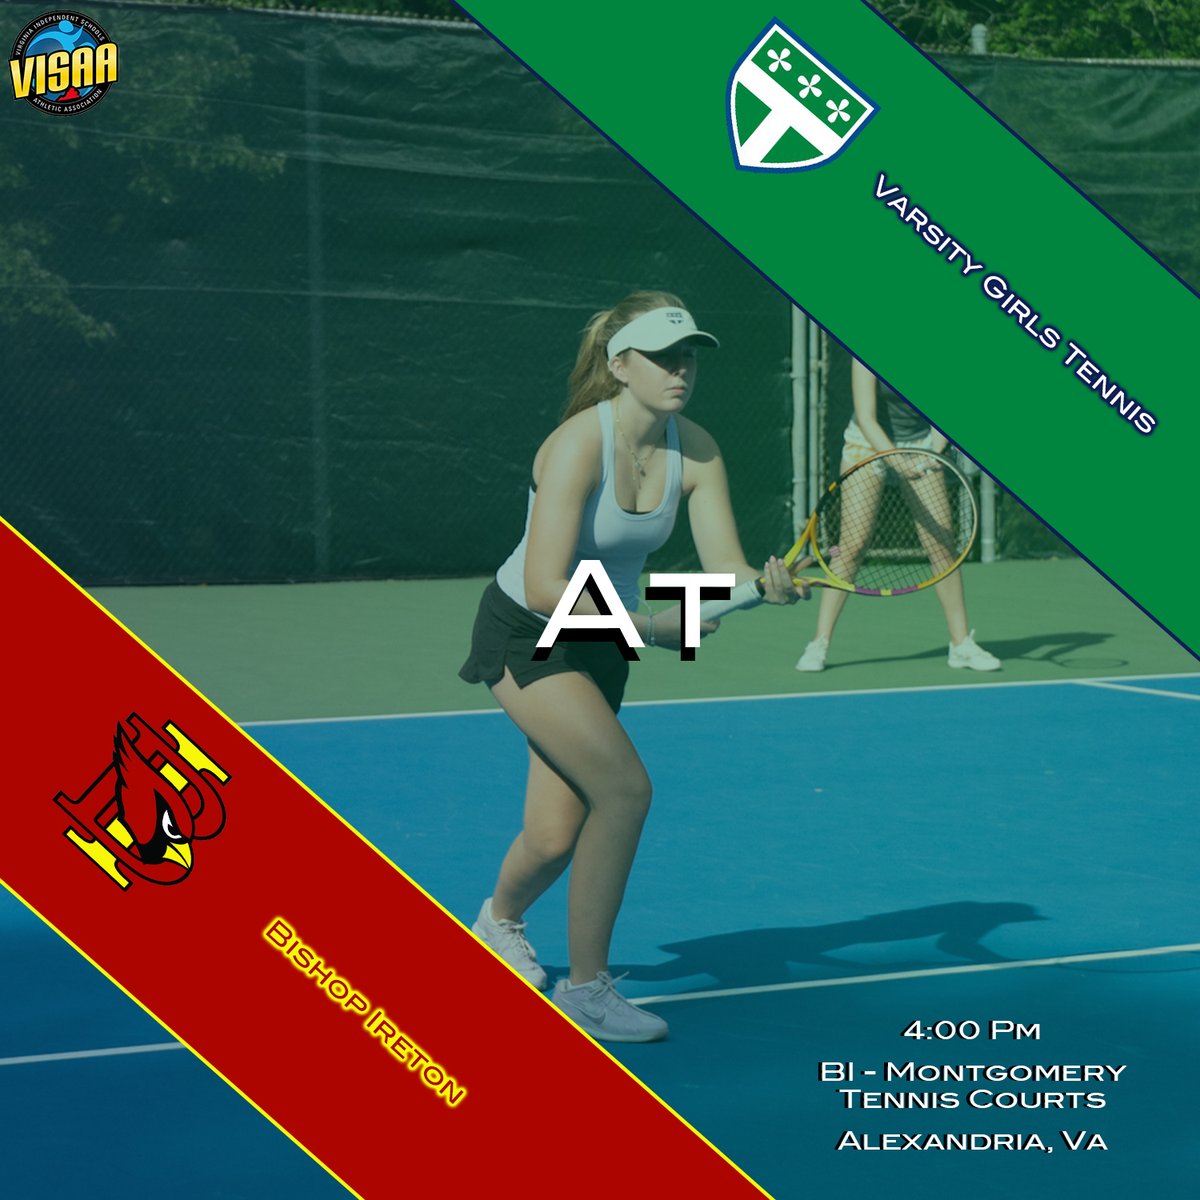 Girls tennis is heading up 95 to take on the Cardinals of Bishop Ireton as they look to keep up their start to the season. Good luck ladies! Let's Go Titans!